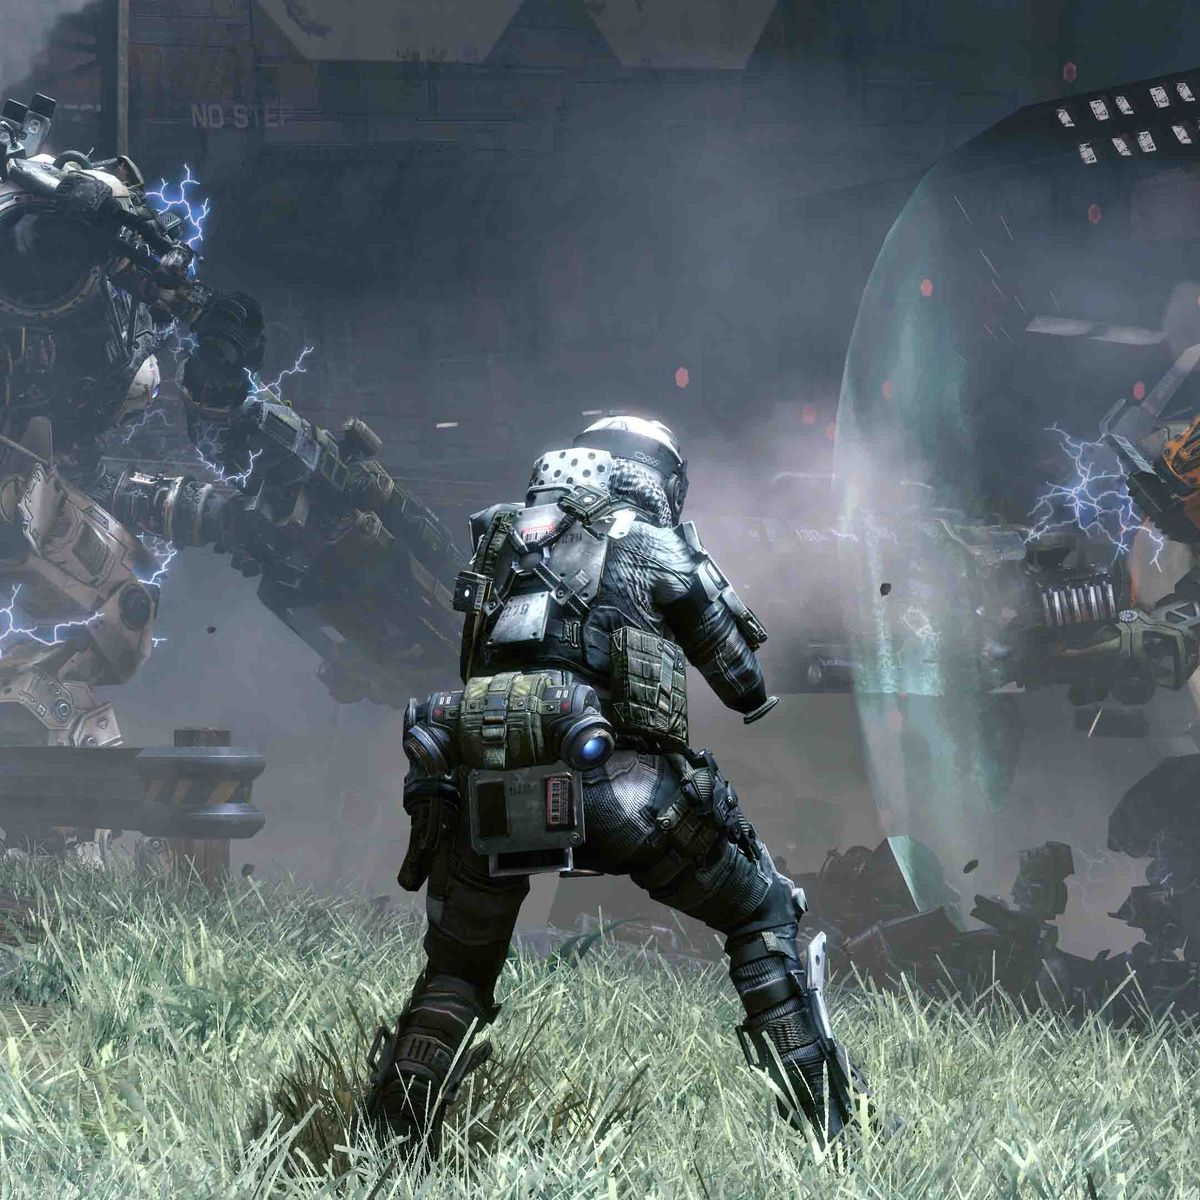 Call of Duty has become review-proof, analyst suggests, but Titanfall &  Destiny will pose real challenge in 2014